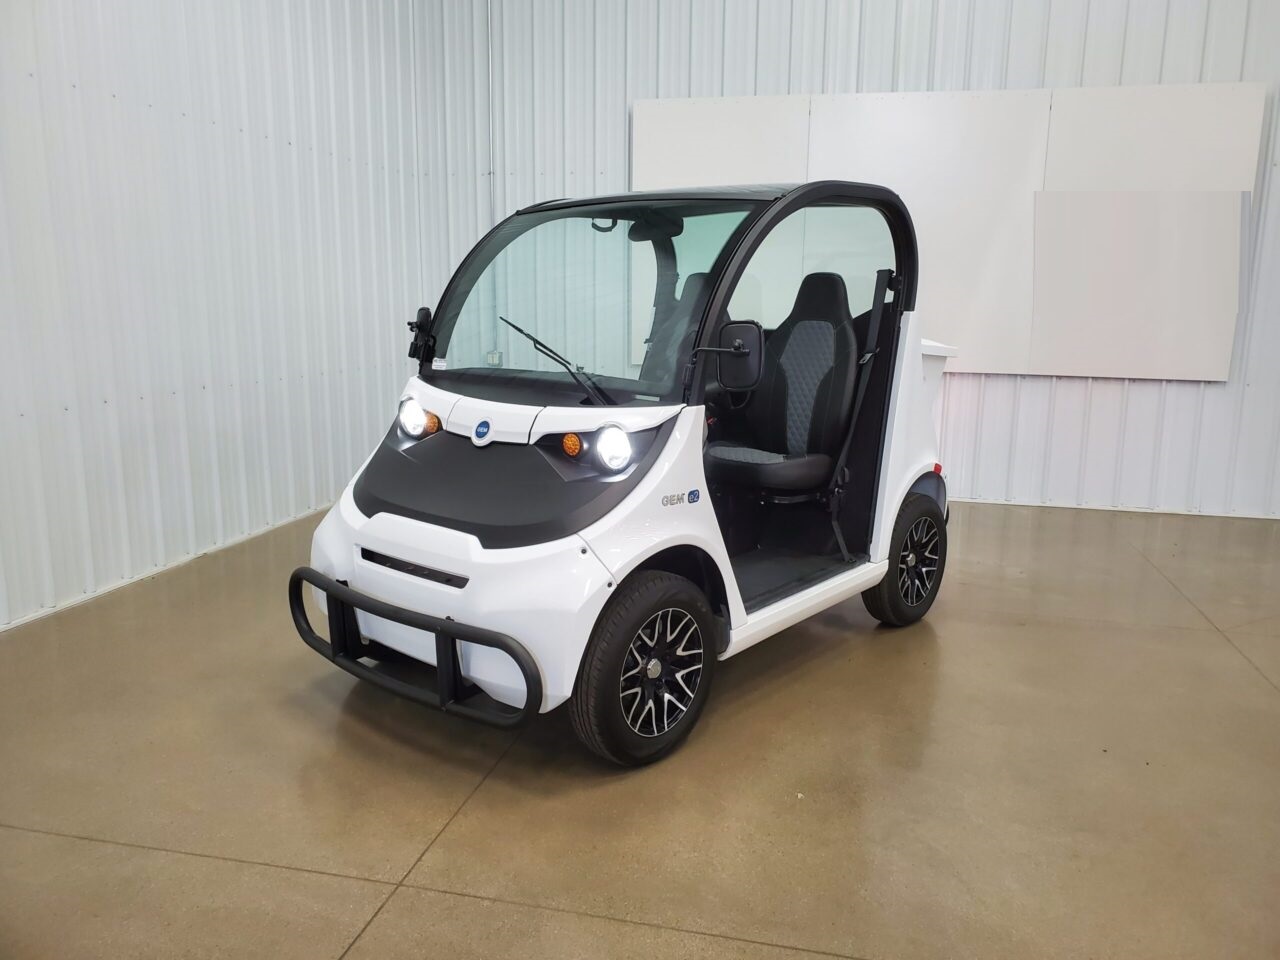 2022 Gem E2 Agm Electric Vehicle Commercial Golf Cart Lsv, White For Sale